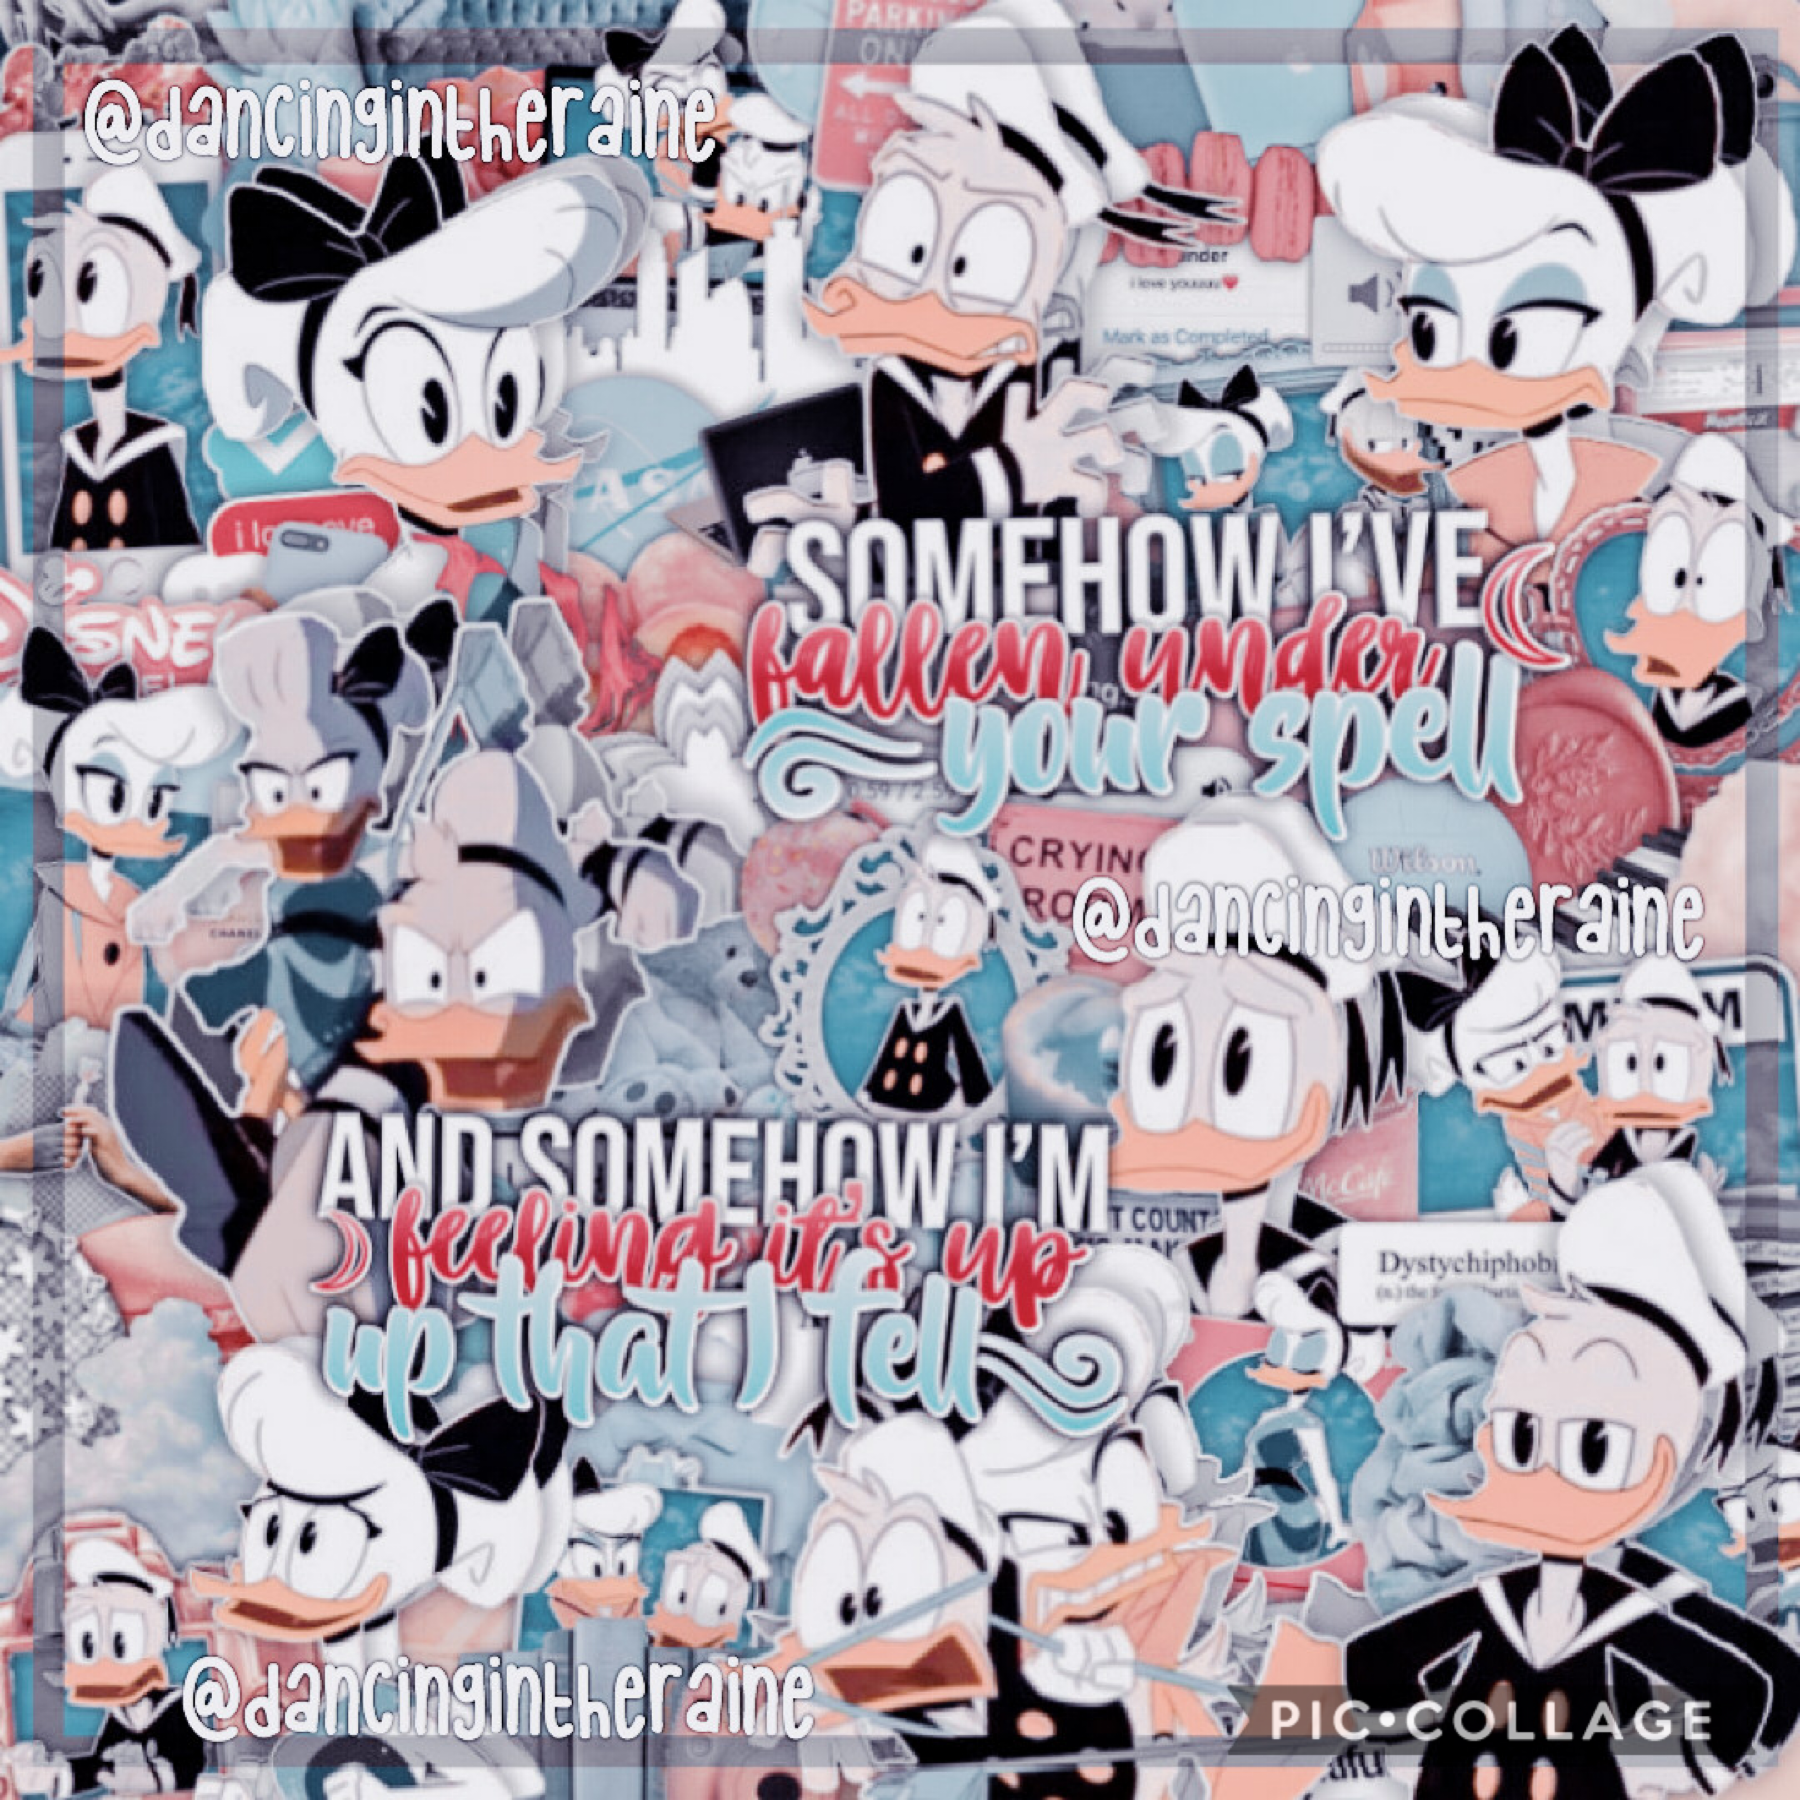 ducktales complex edit! I really like it 